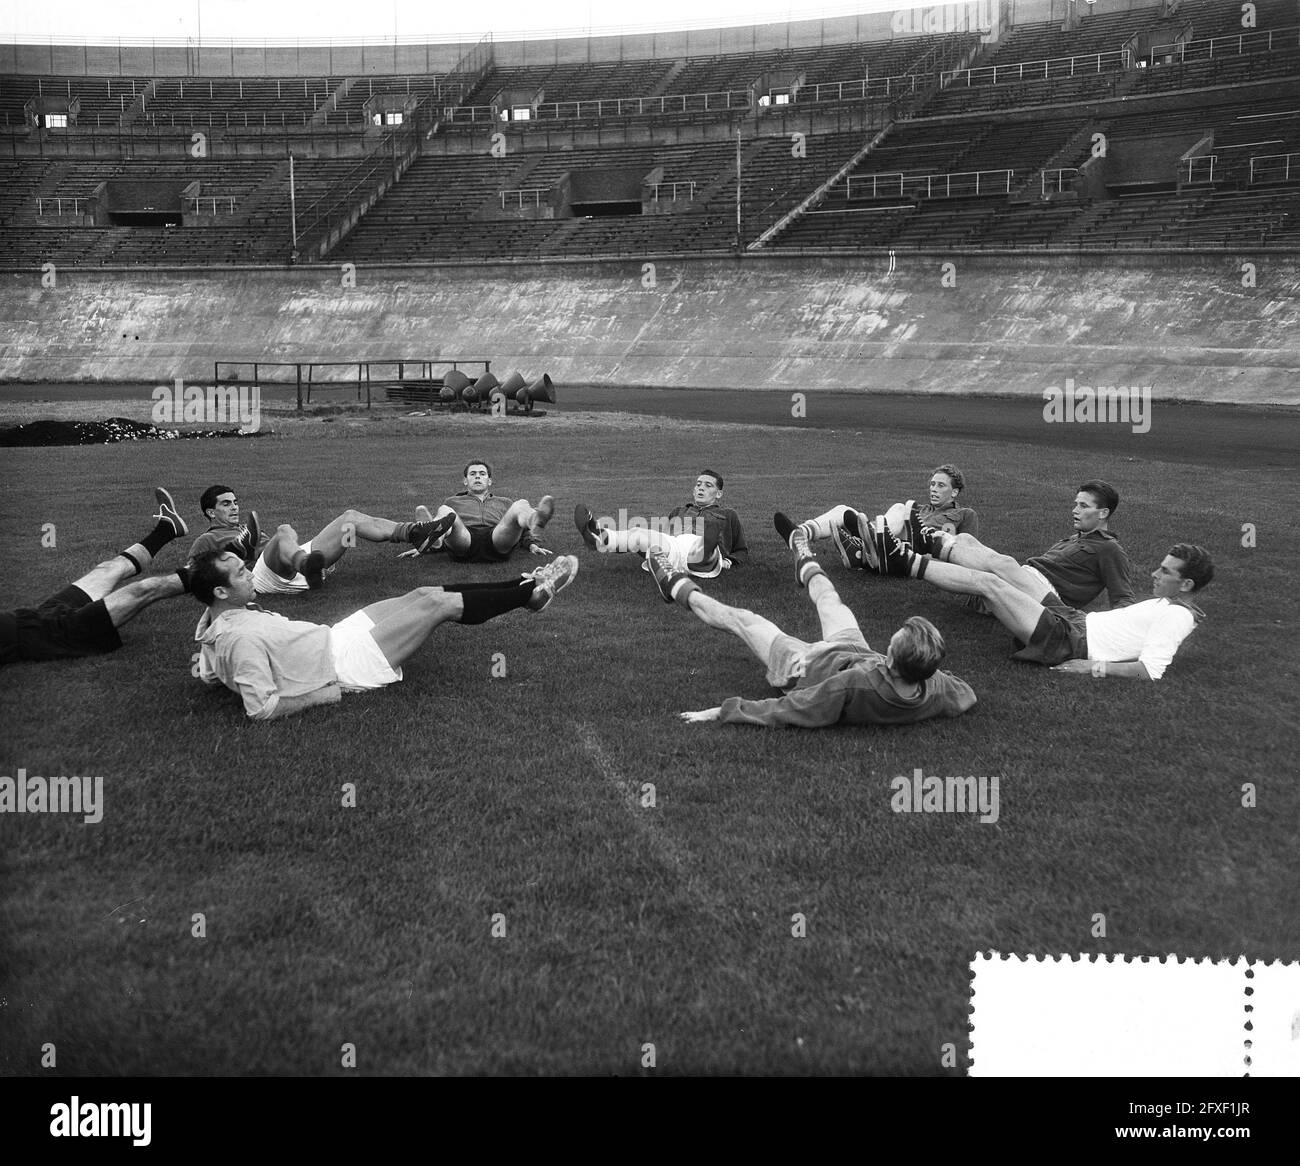 Training Dutch national team, gymnastic exercises, September 6, 1955, sport, soccer, The Netherlands, 20th century press agency photo, news to remember, documentary, historic photography 1945-1990, visual stories, human history of the Twentieth Century, capturing moments in time Stock Photo